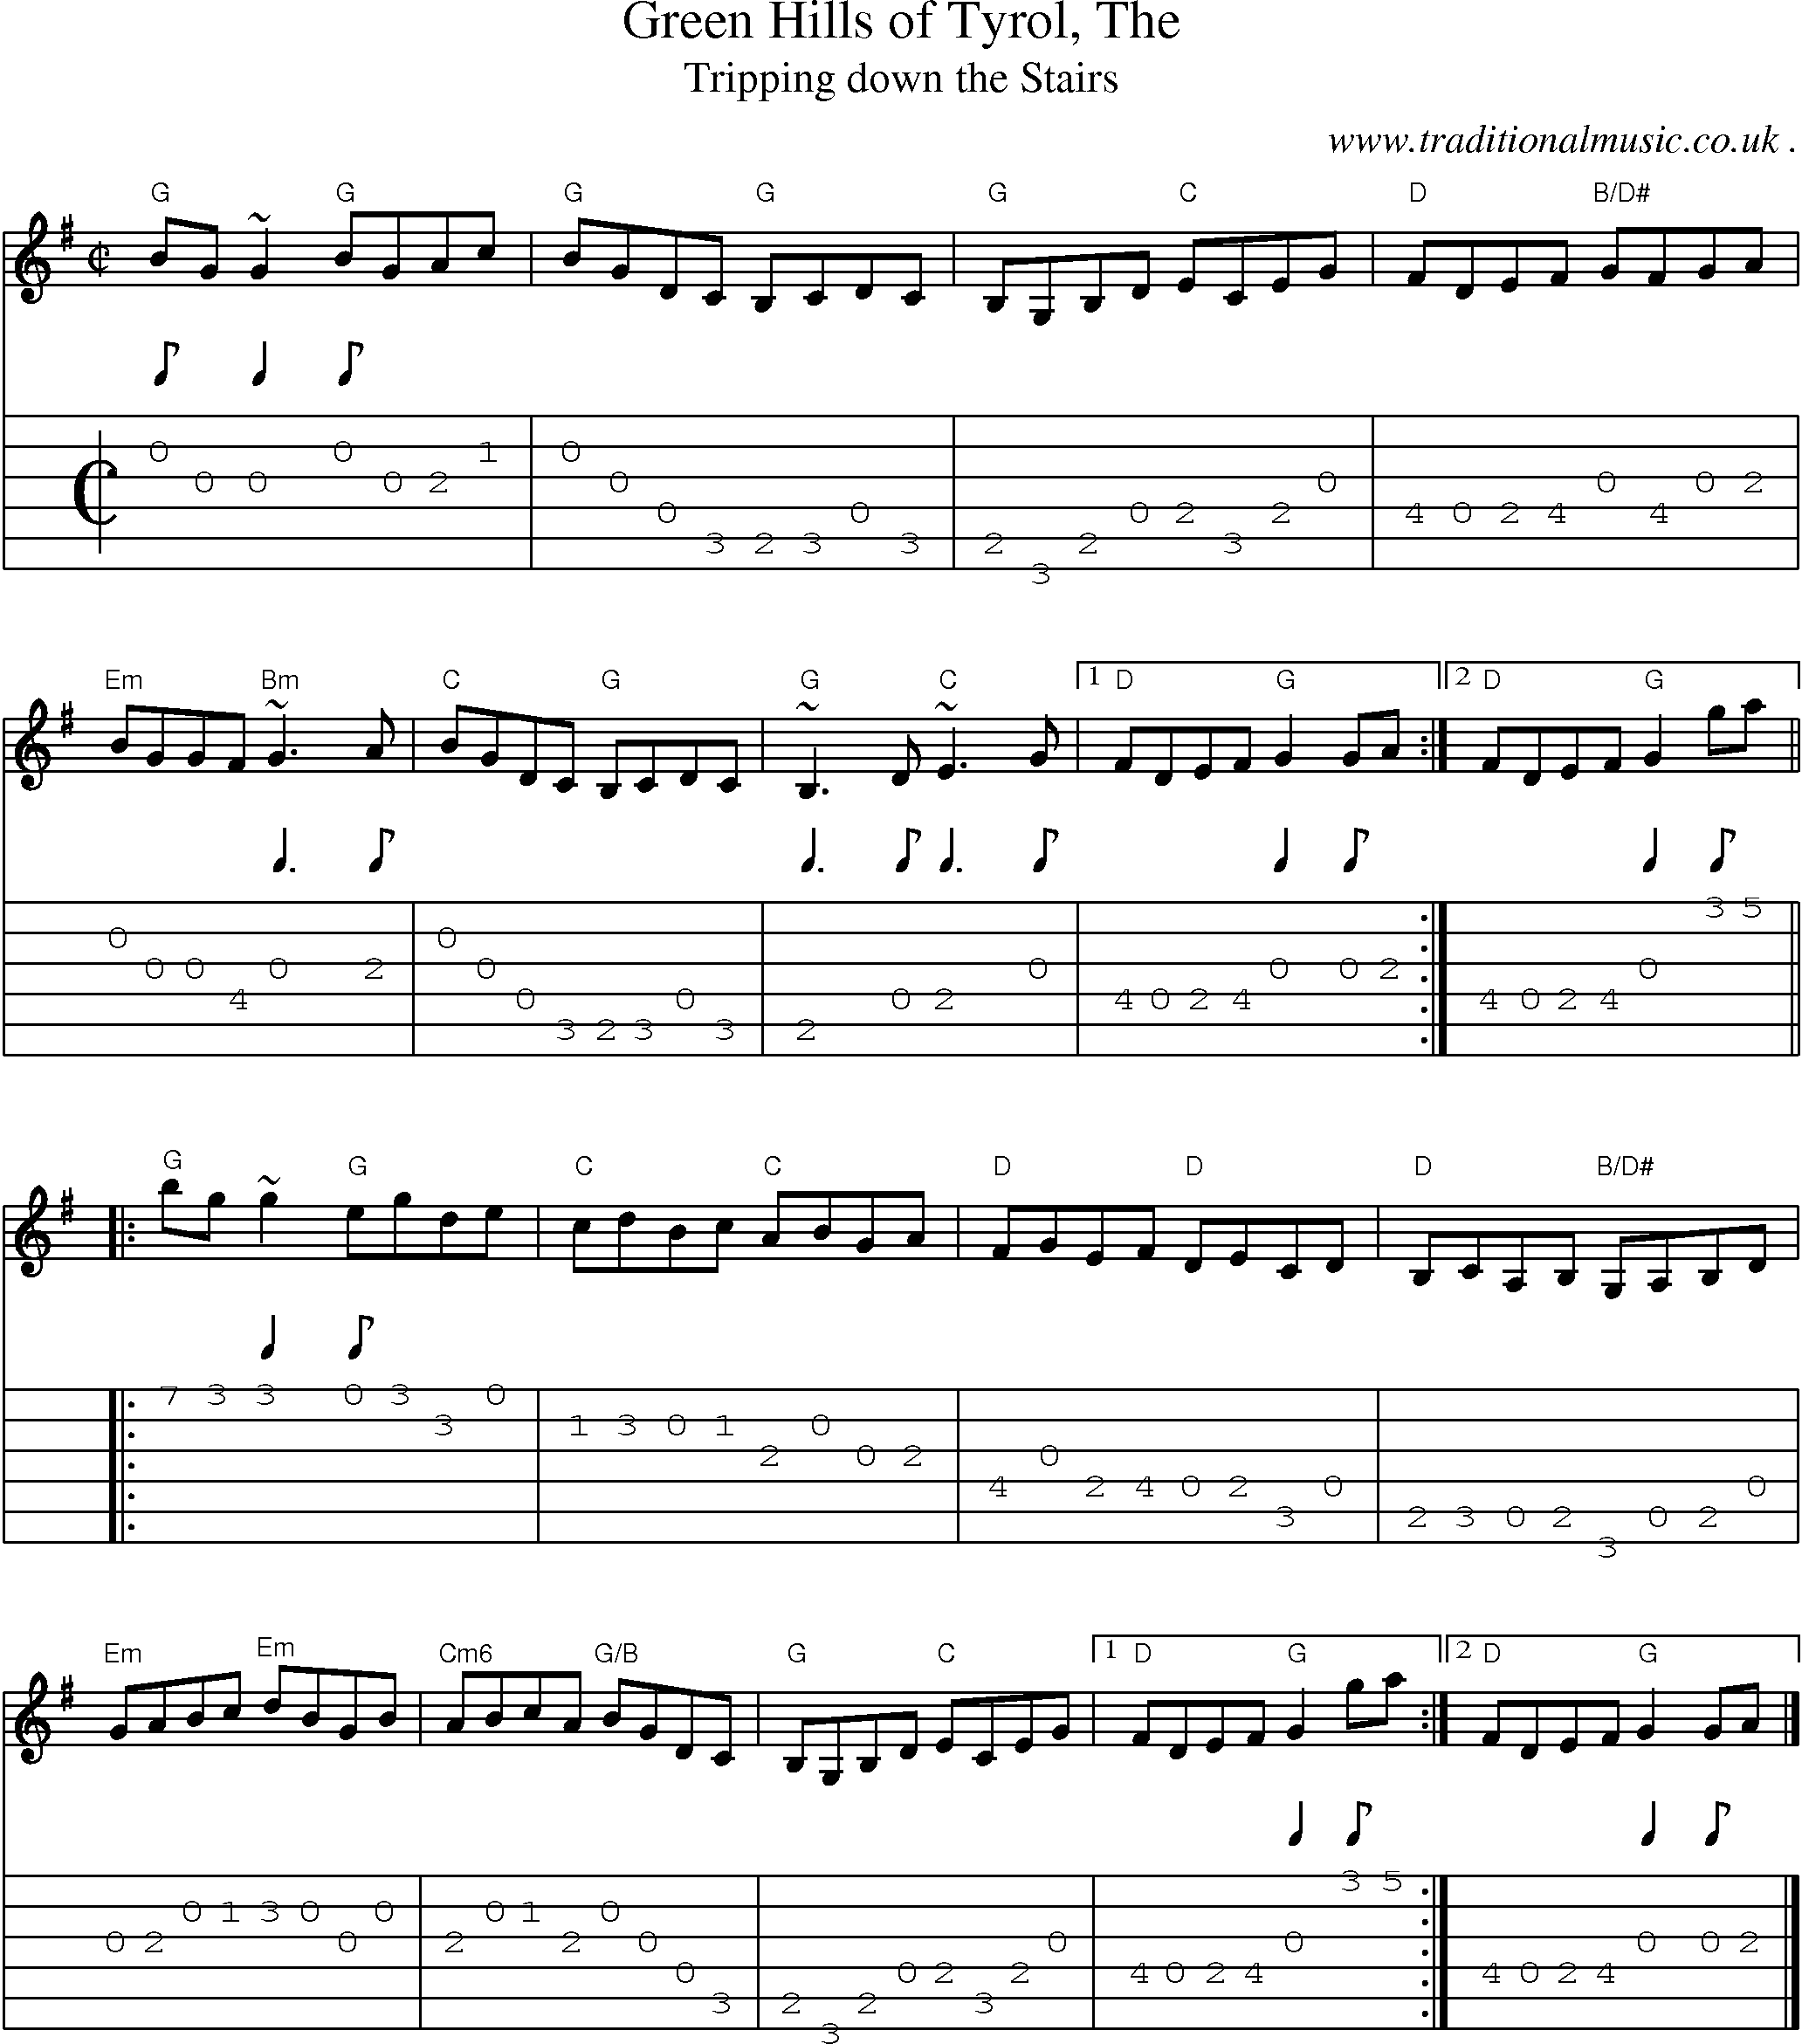 Sheet-music  score, Chords and Guitar Tabs for Green Hills Of Tyrol The